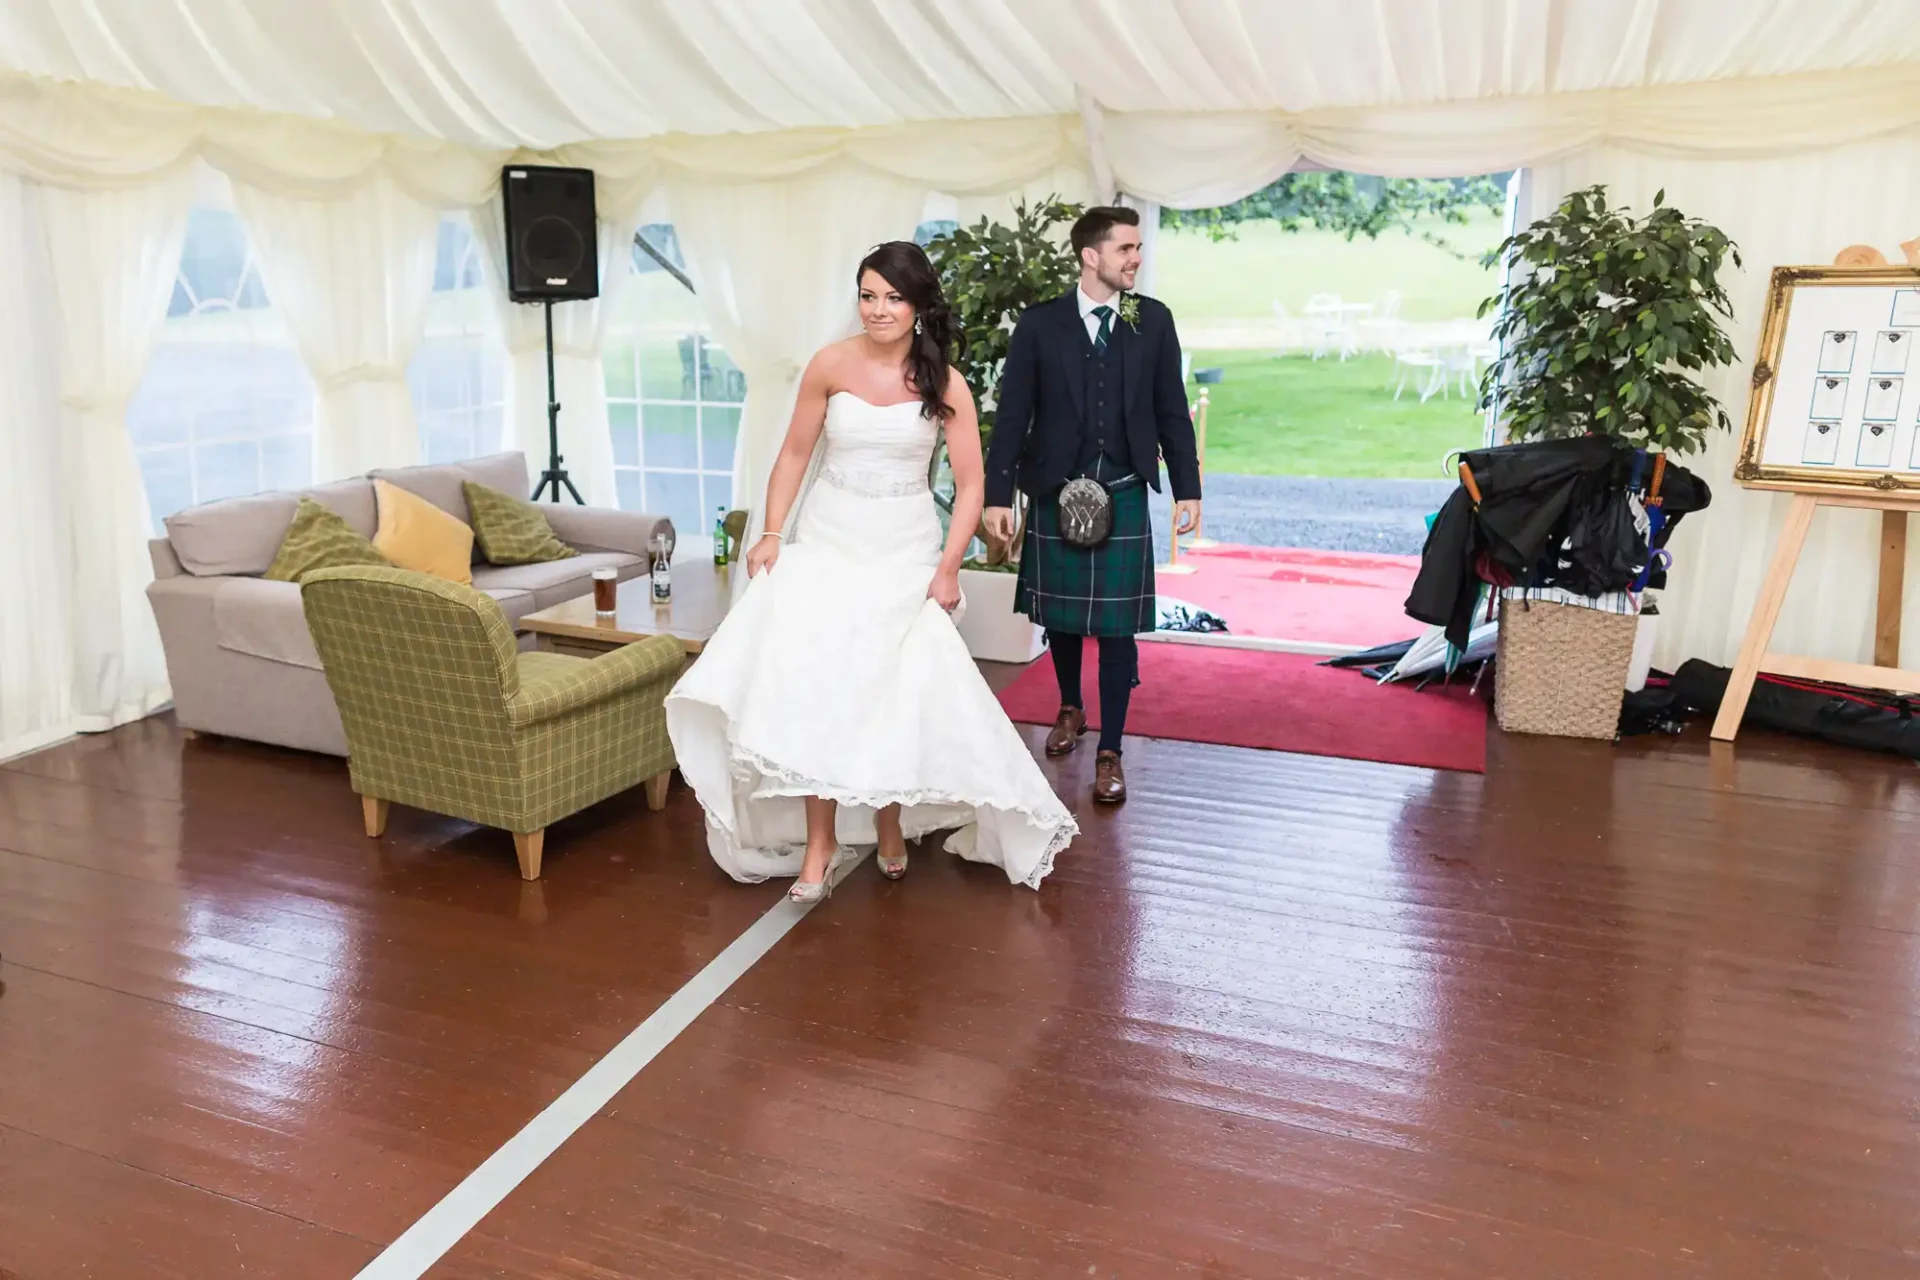 A bride and groom walking hand in hand inside a tent at a wedding reception, with furniture and a green outdoor setting visible in the background.